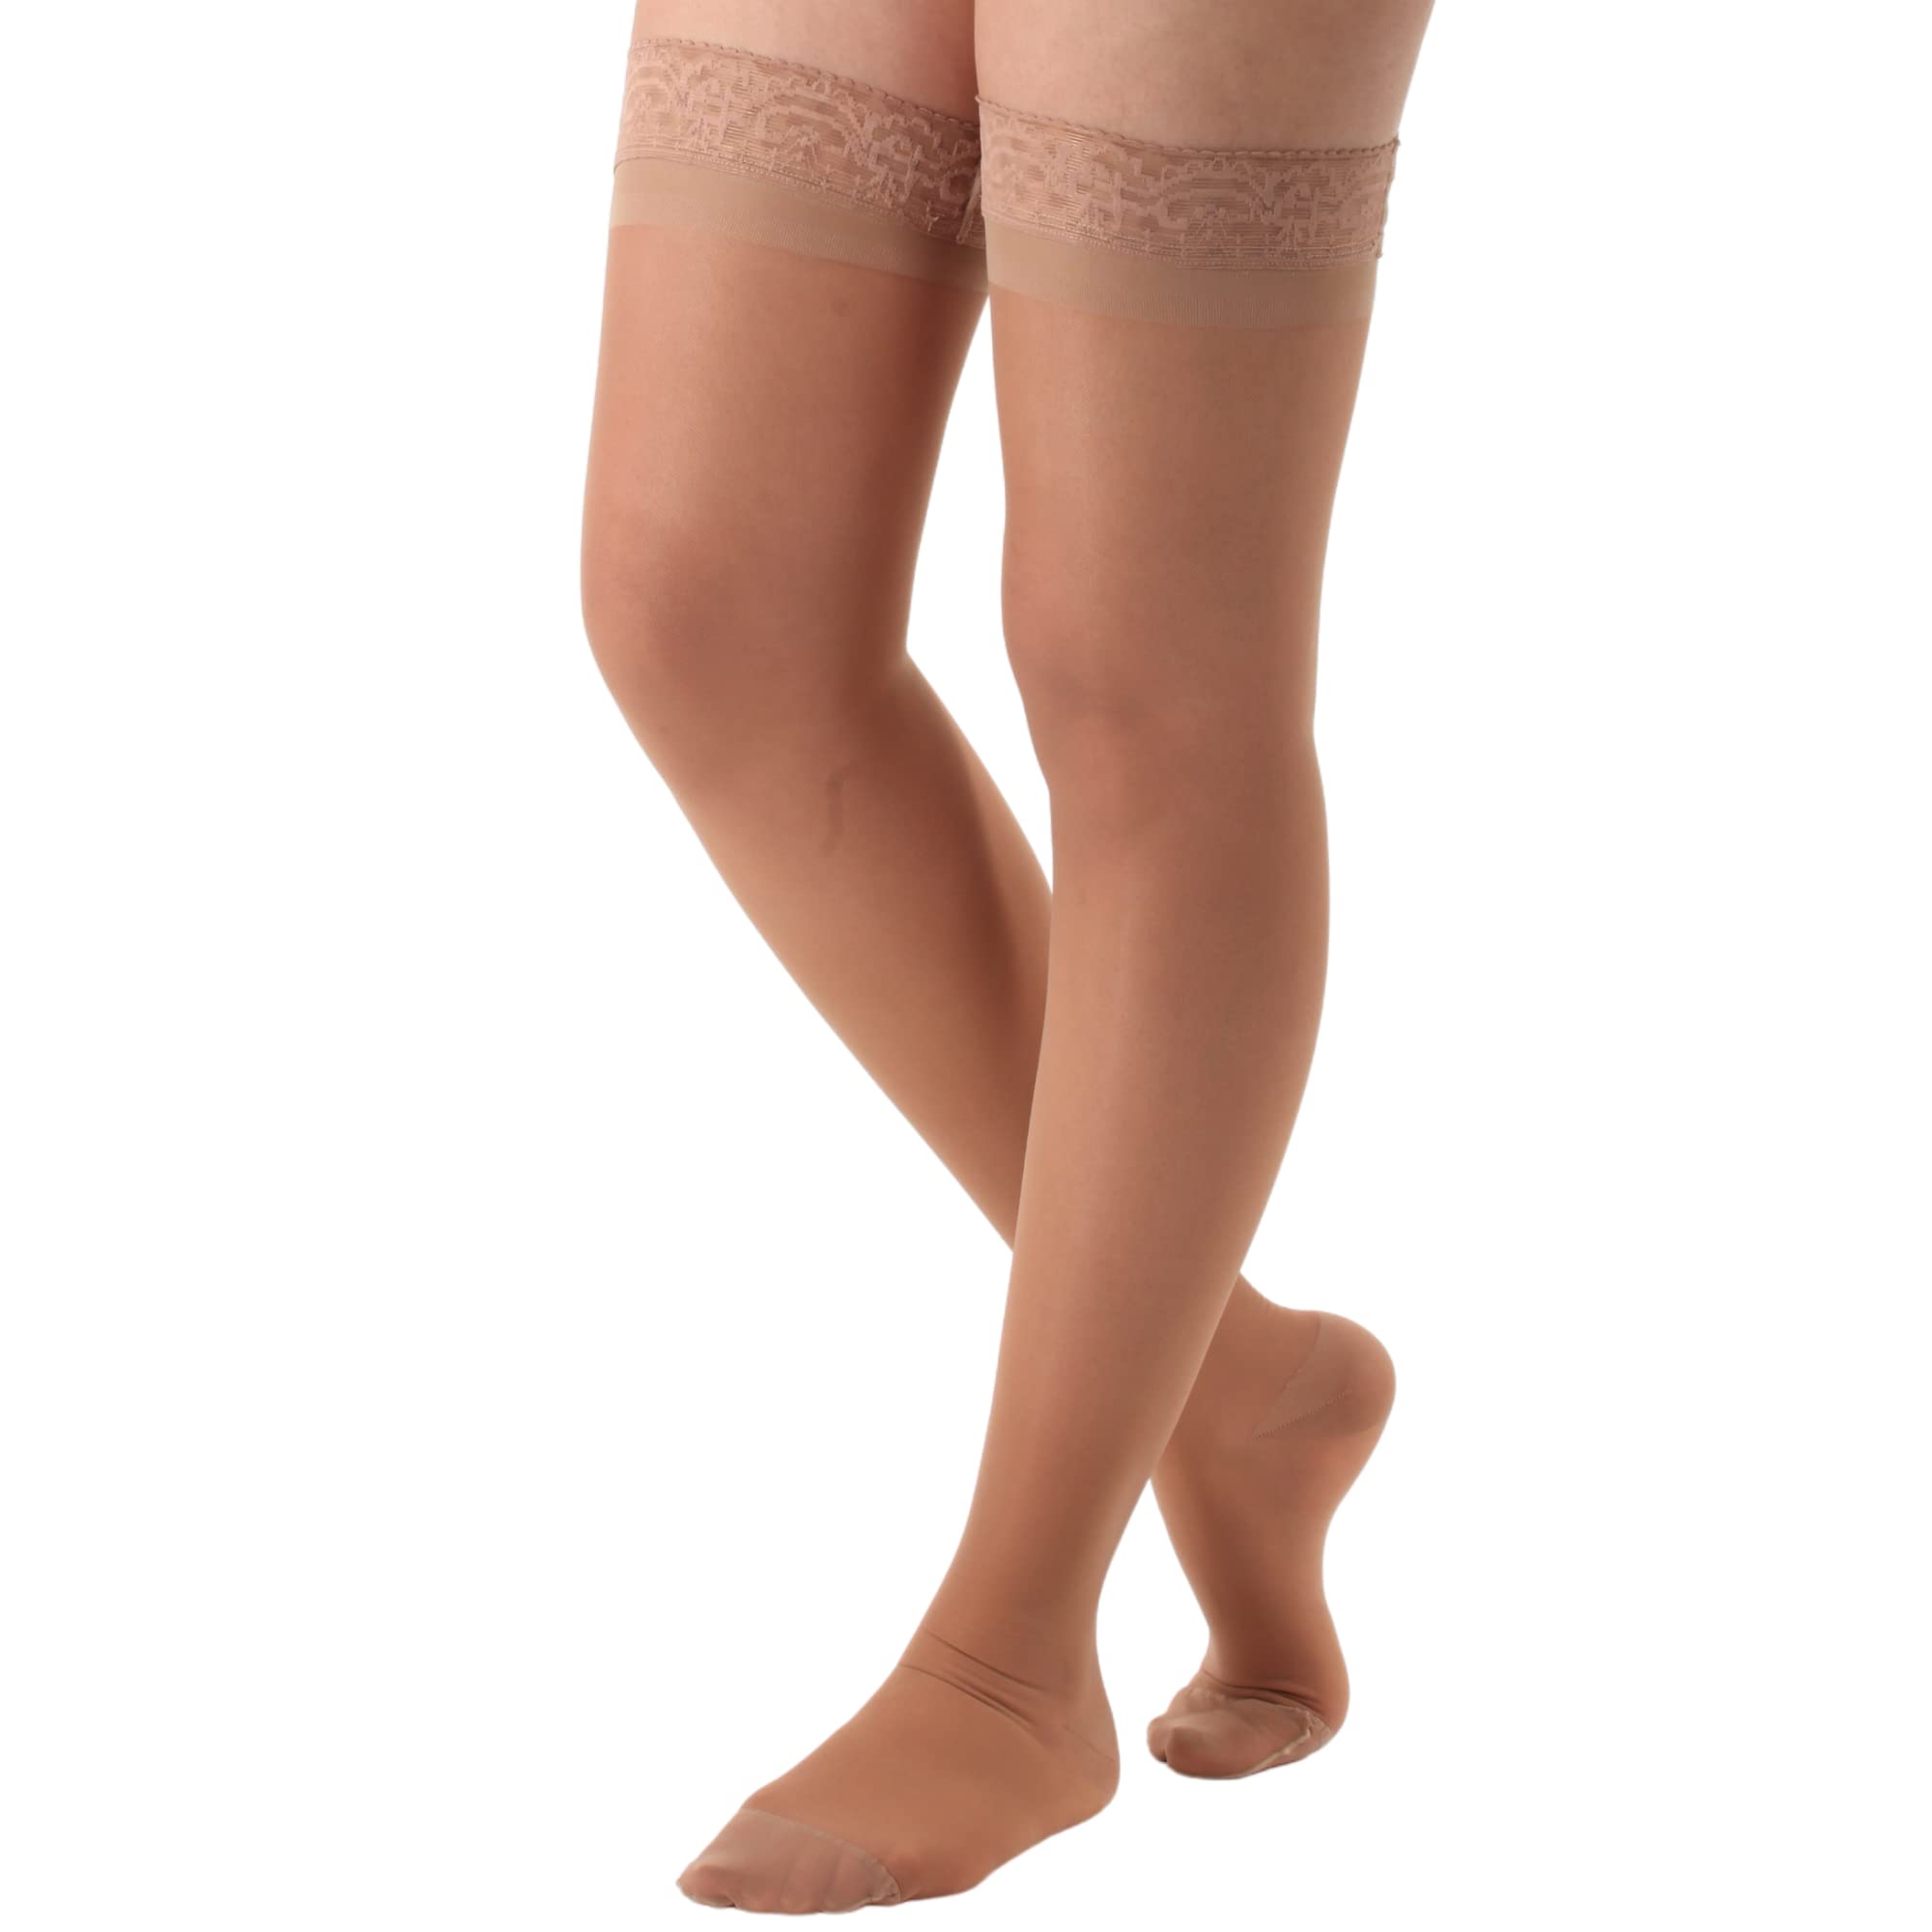 Absolute Support Microfiber Opaque Compression Stockings Thigh